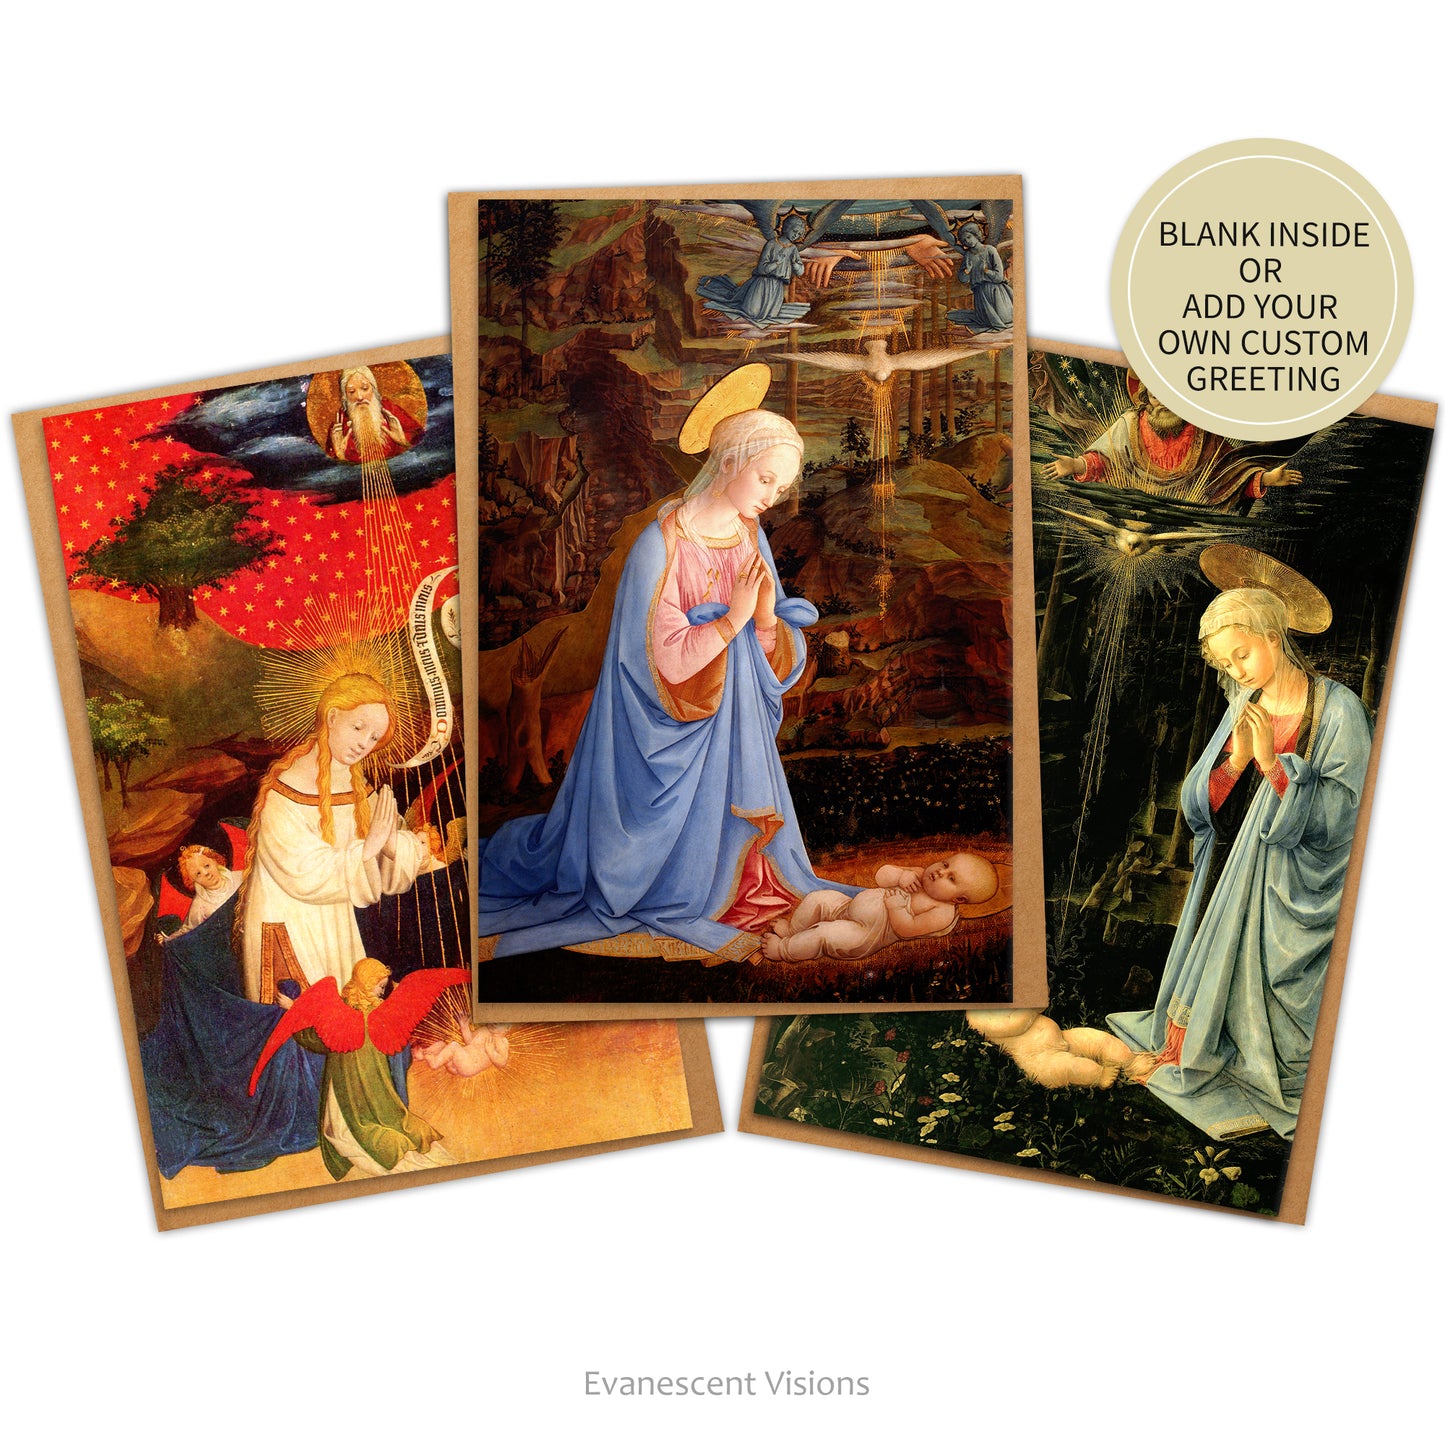 Three cards with envelopes, featuring images from Medieval and Renaissance paintings showing the Virgin Mary Adoring the Christ Child. Sticker says Blank inside or add your own custom greeting